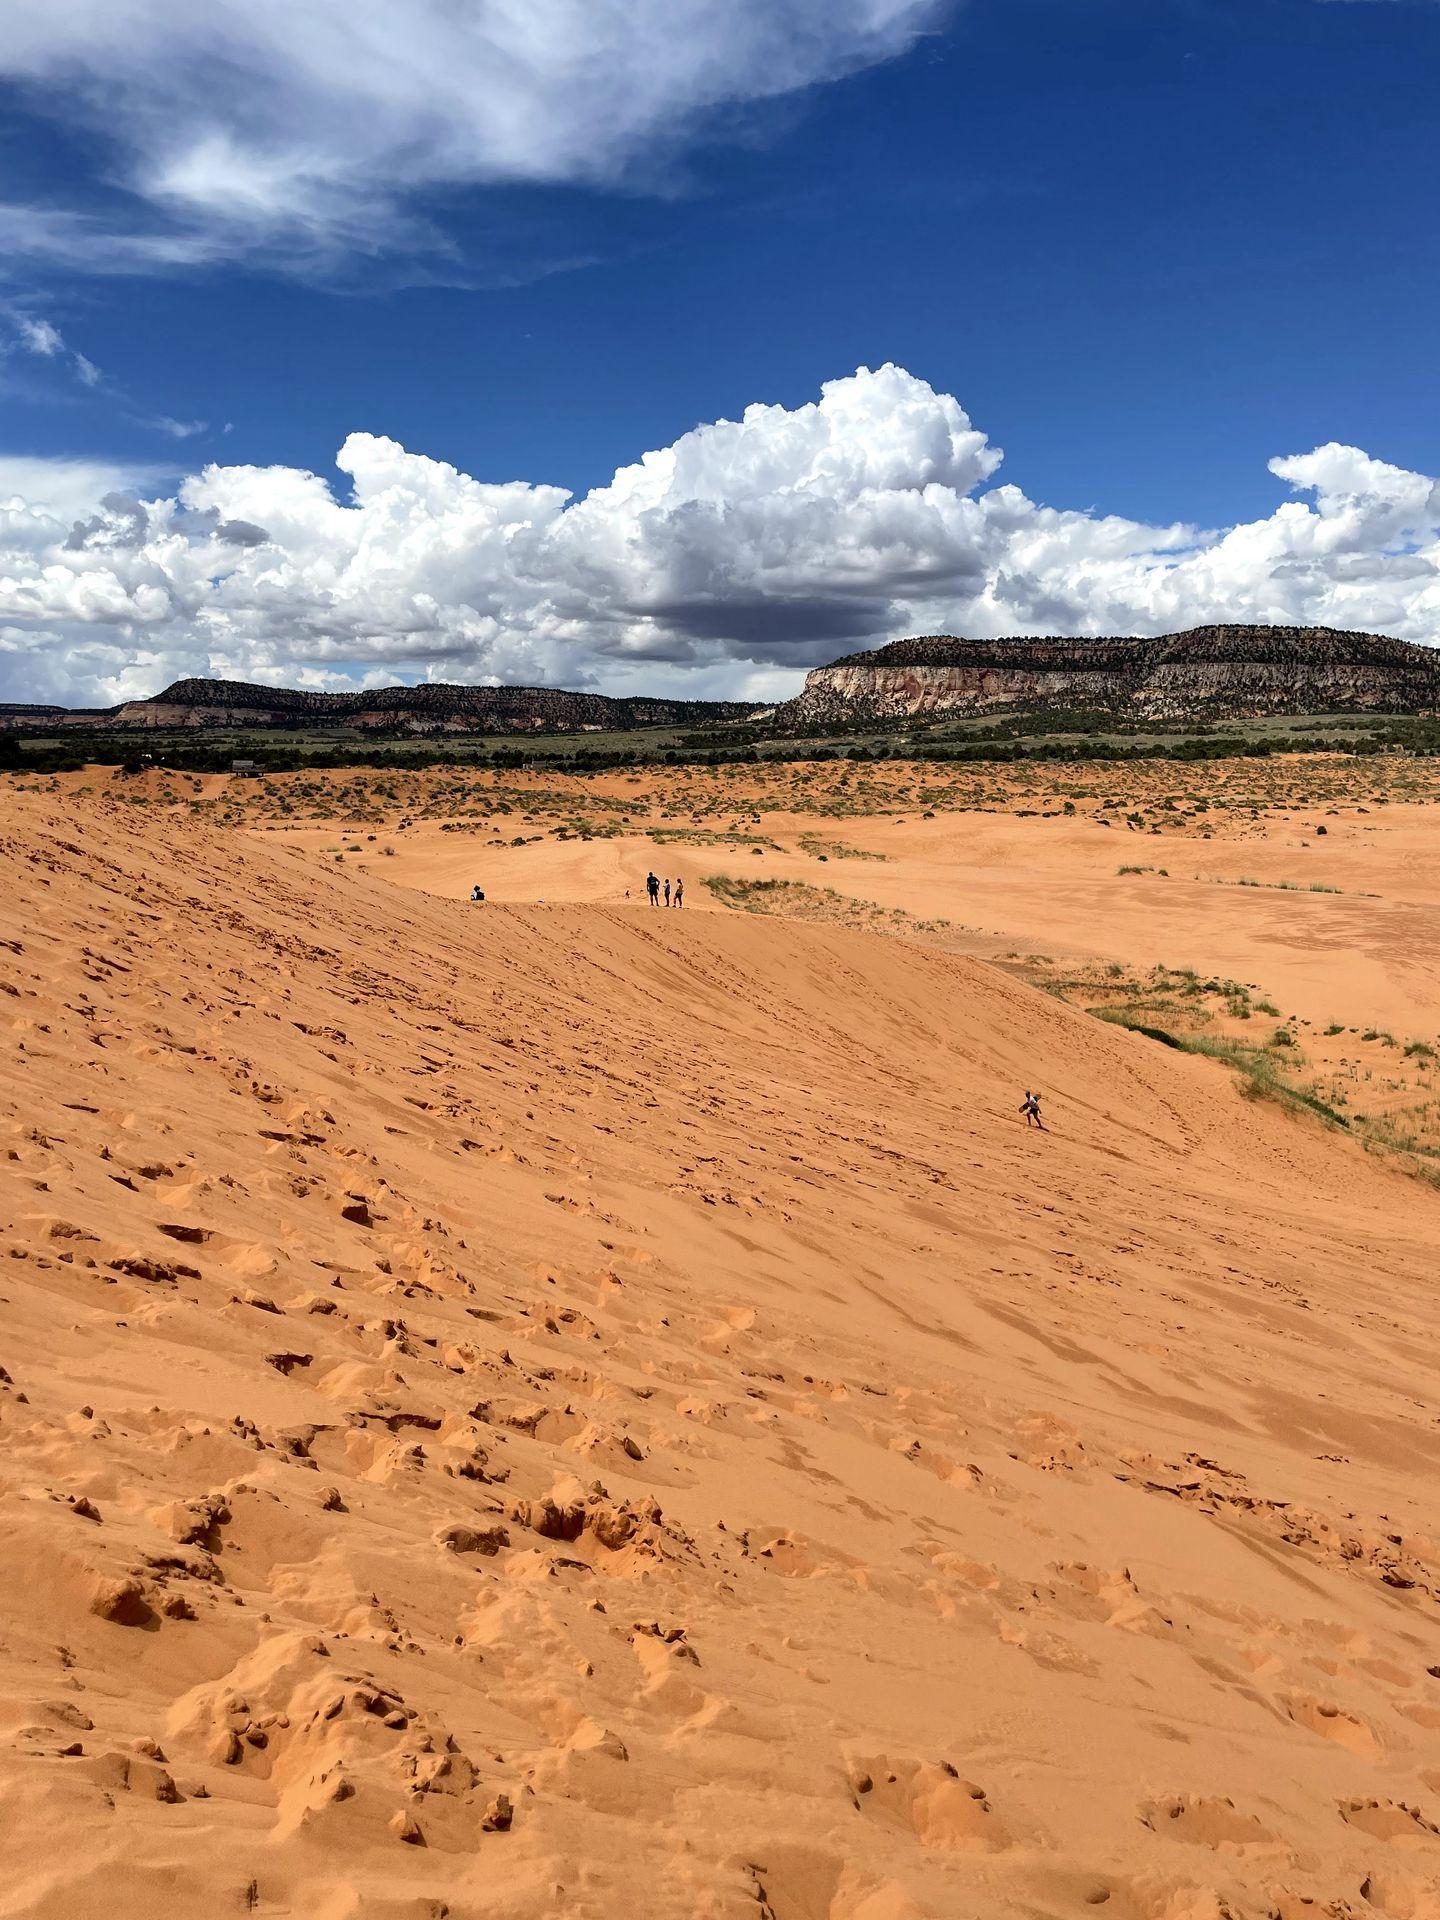 A view looking at the sand at Coral Pink Sand Dunes State Park.